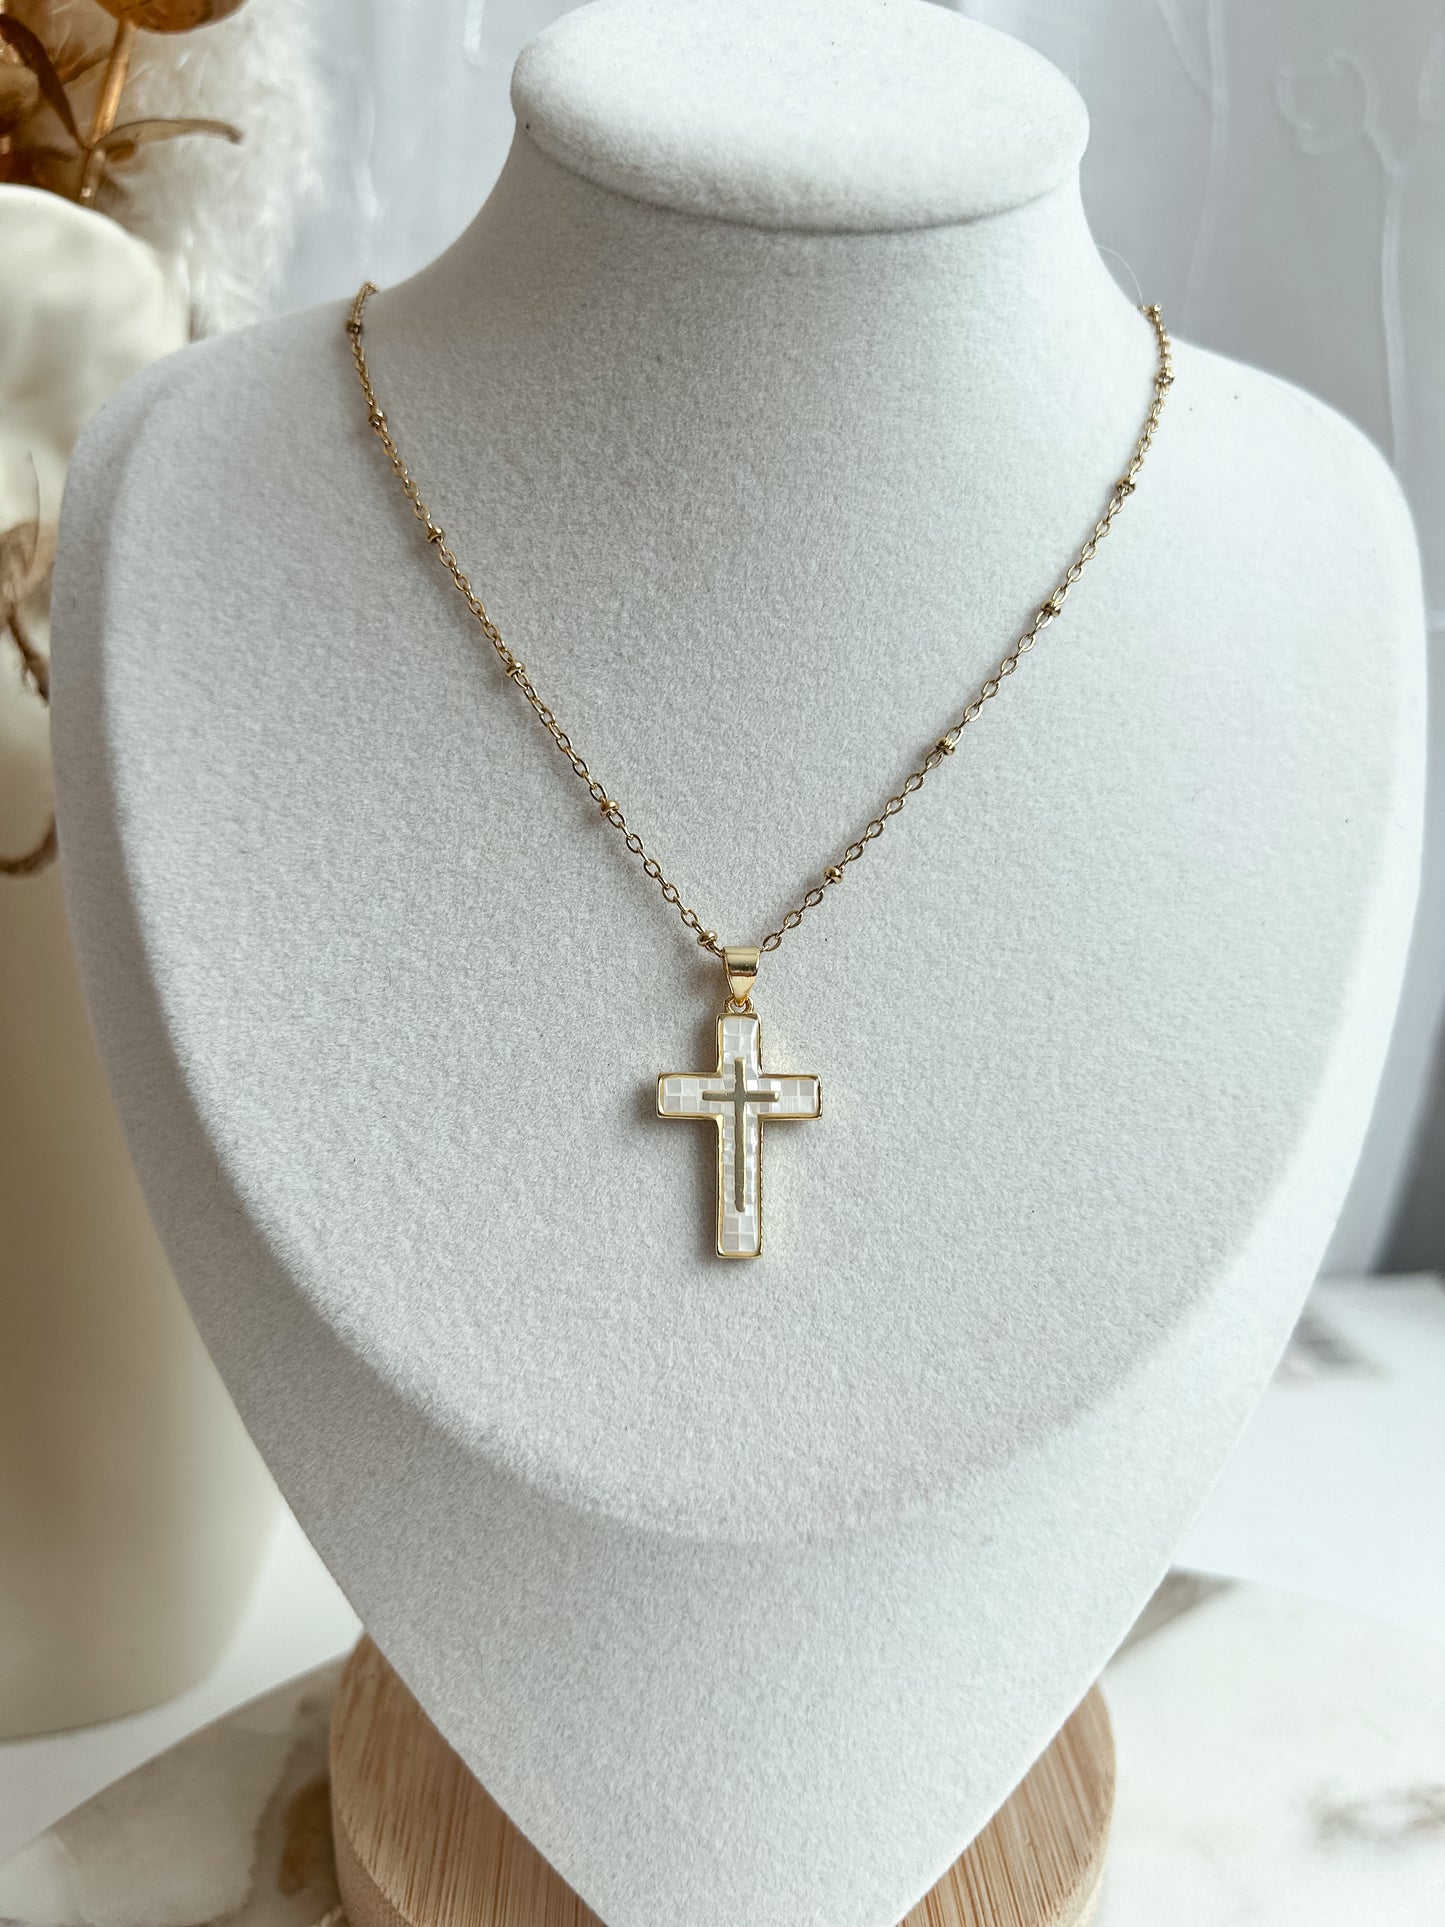 Pick up your cross chain necklace